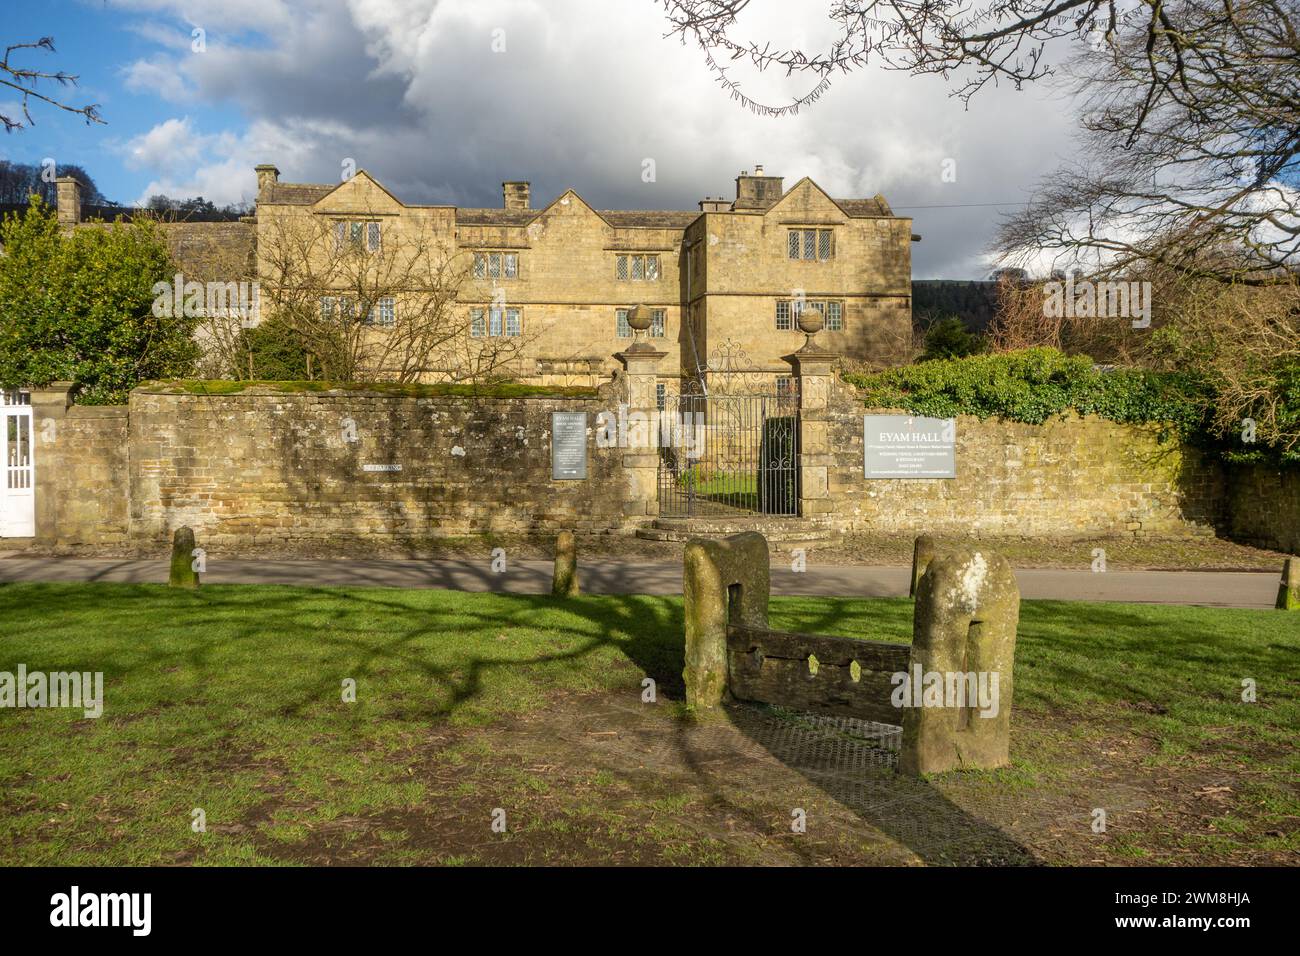 Eyam Hall, a Jacobean style manor house in the Derbyshire Peak District plague village of Eyam England seen from the stocks on the village green Stock Photo